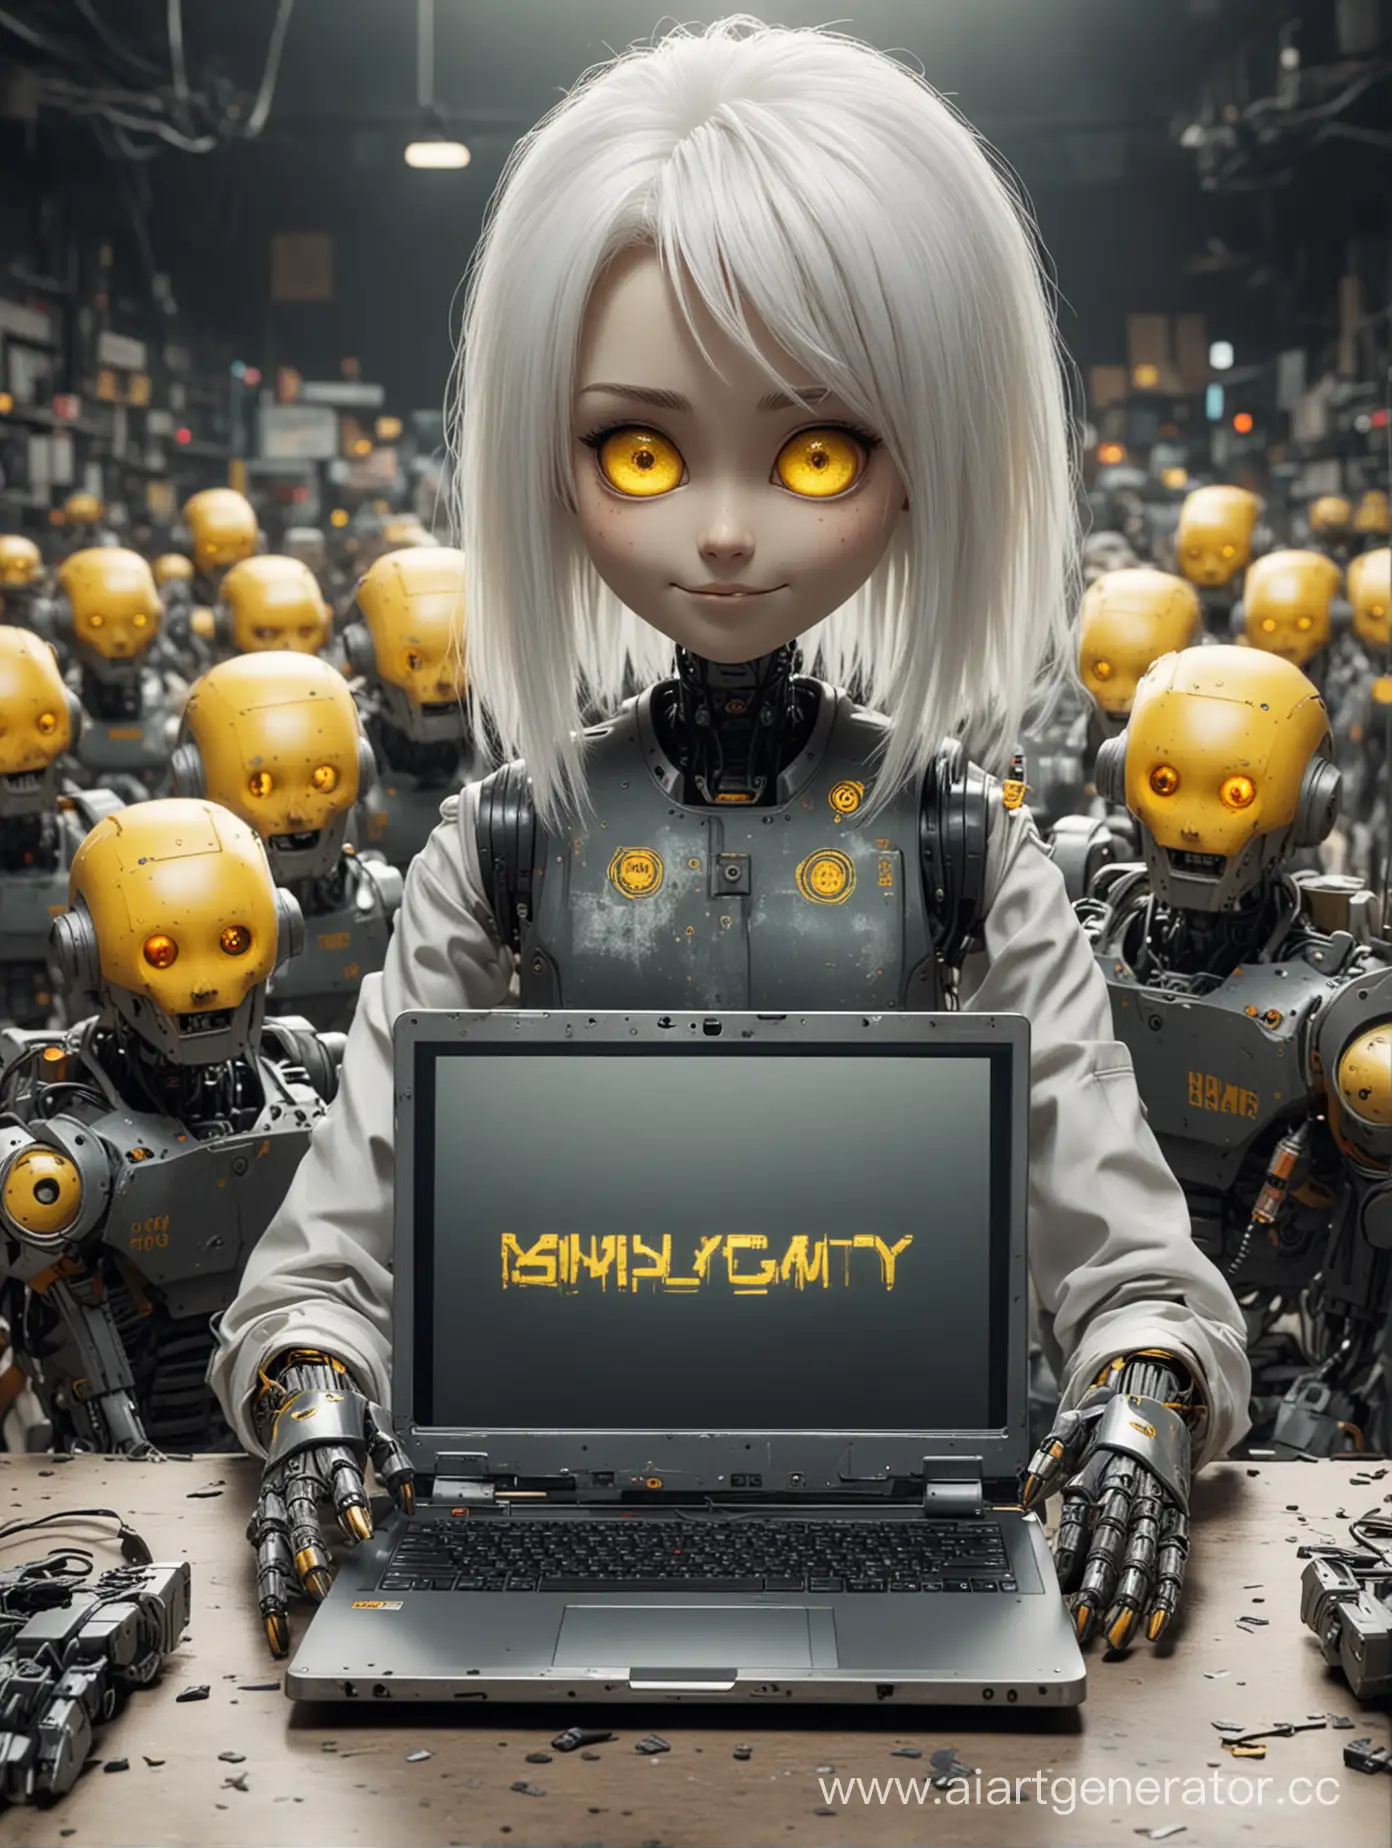 Malevolent-Robot-with-Laptop-Leading-Army